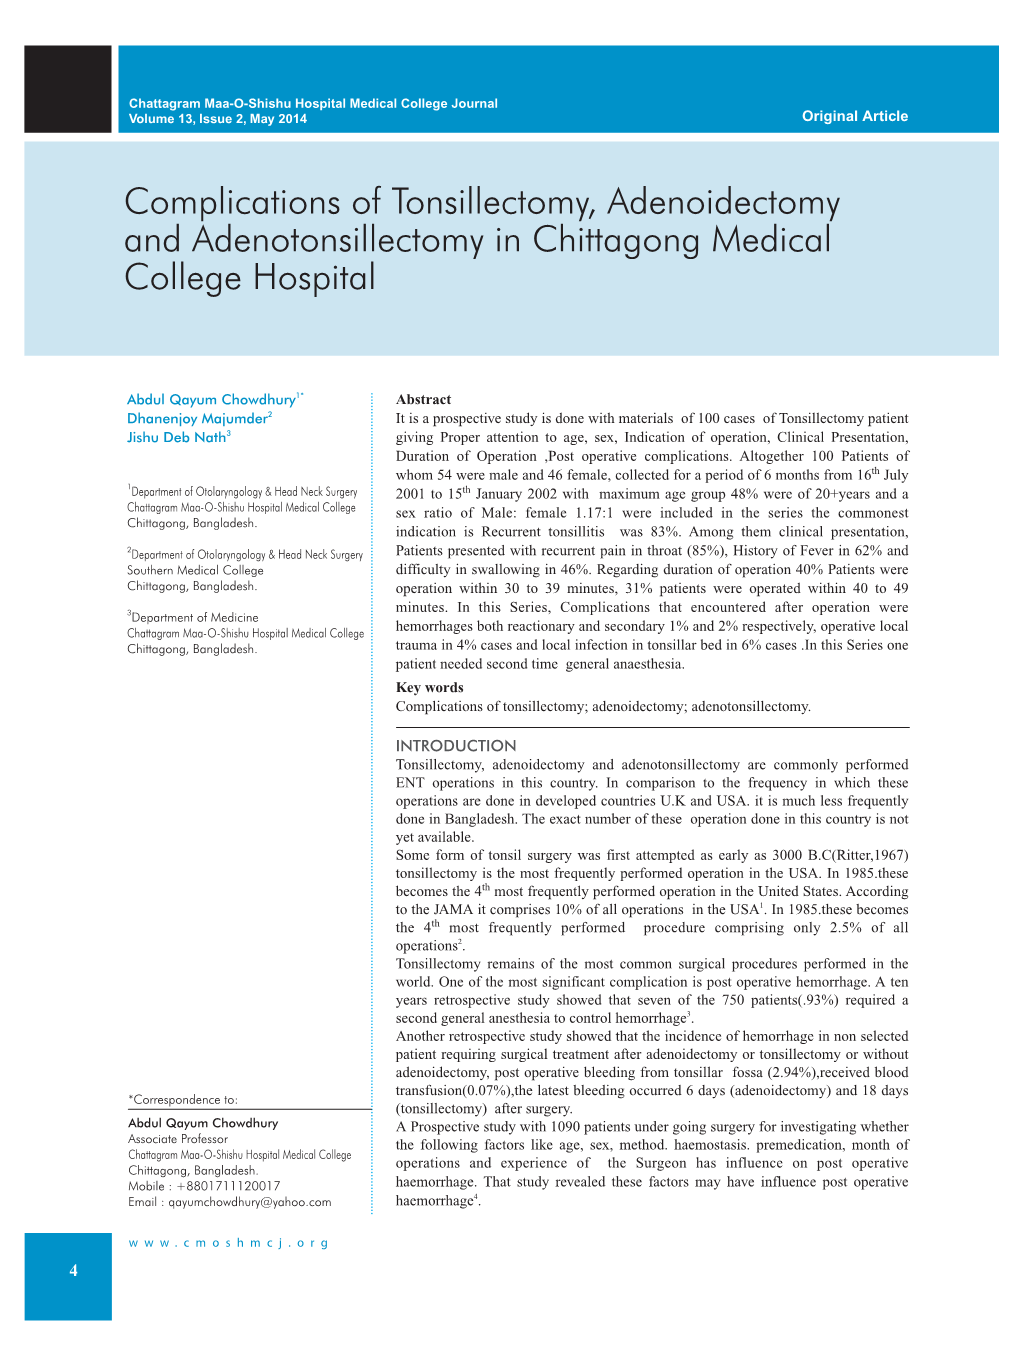 Complications of Tonsillectomy, Adenoidectomy and Adenotonsillectomy in Chittagong Medical College Hospital